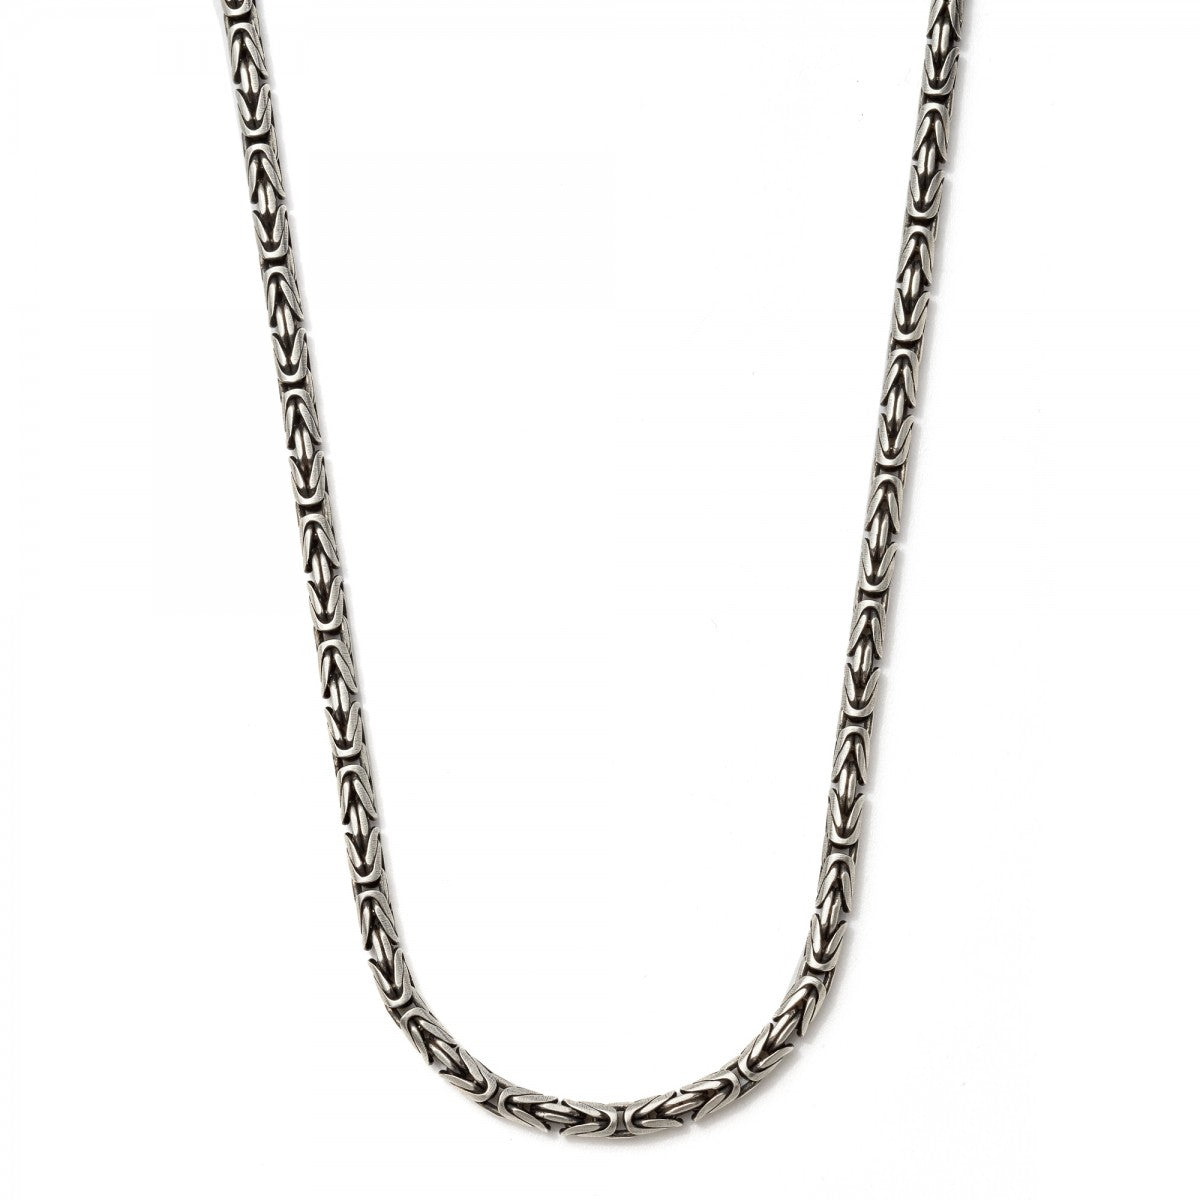 John Varvatos Cable Link Chain Necklace - Farfetch